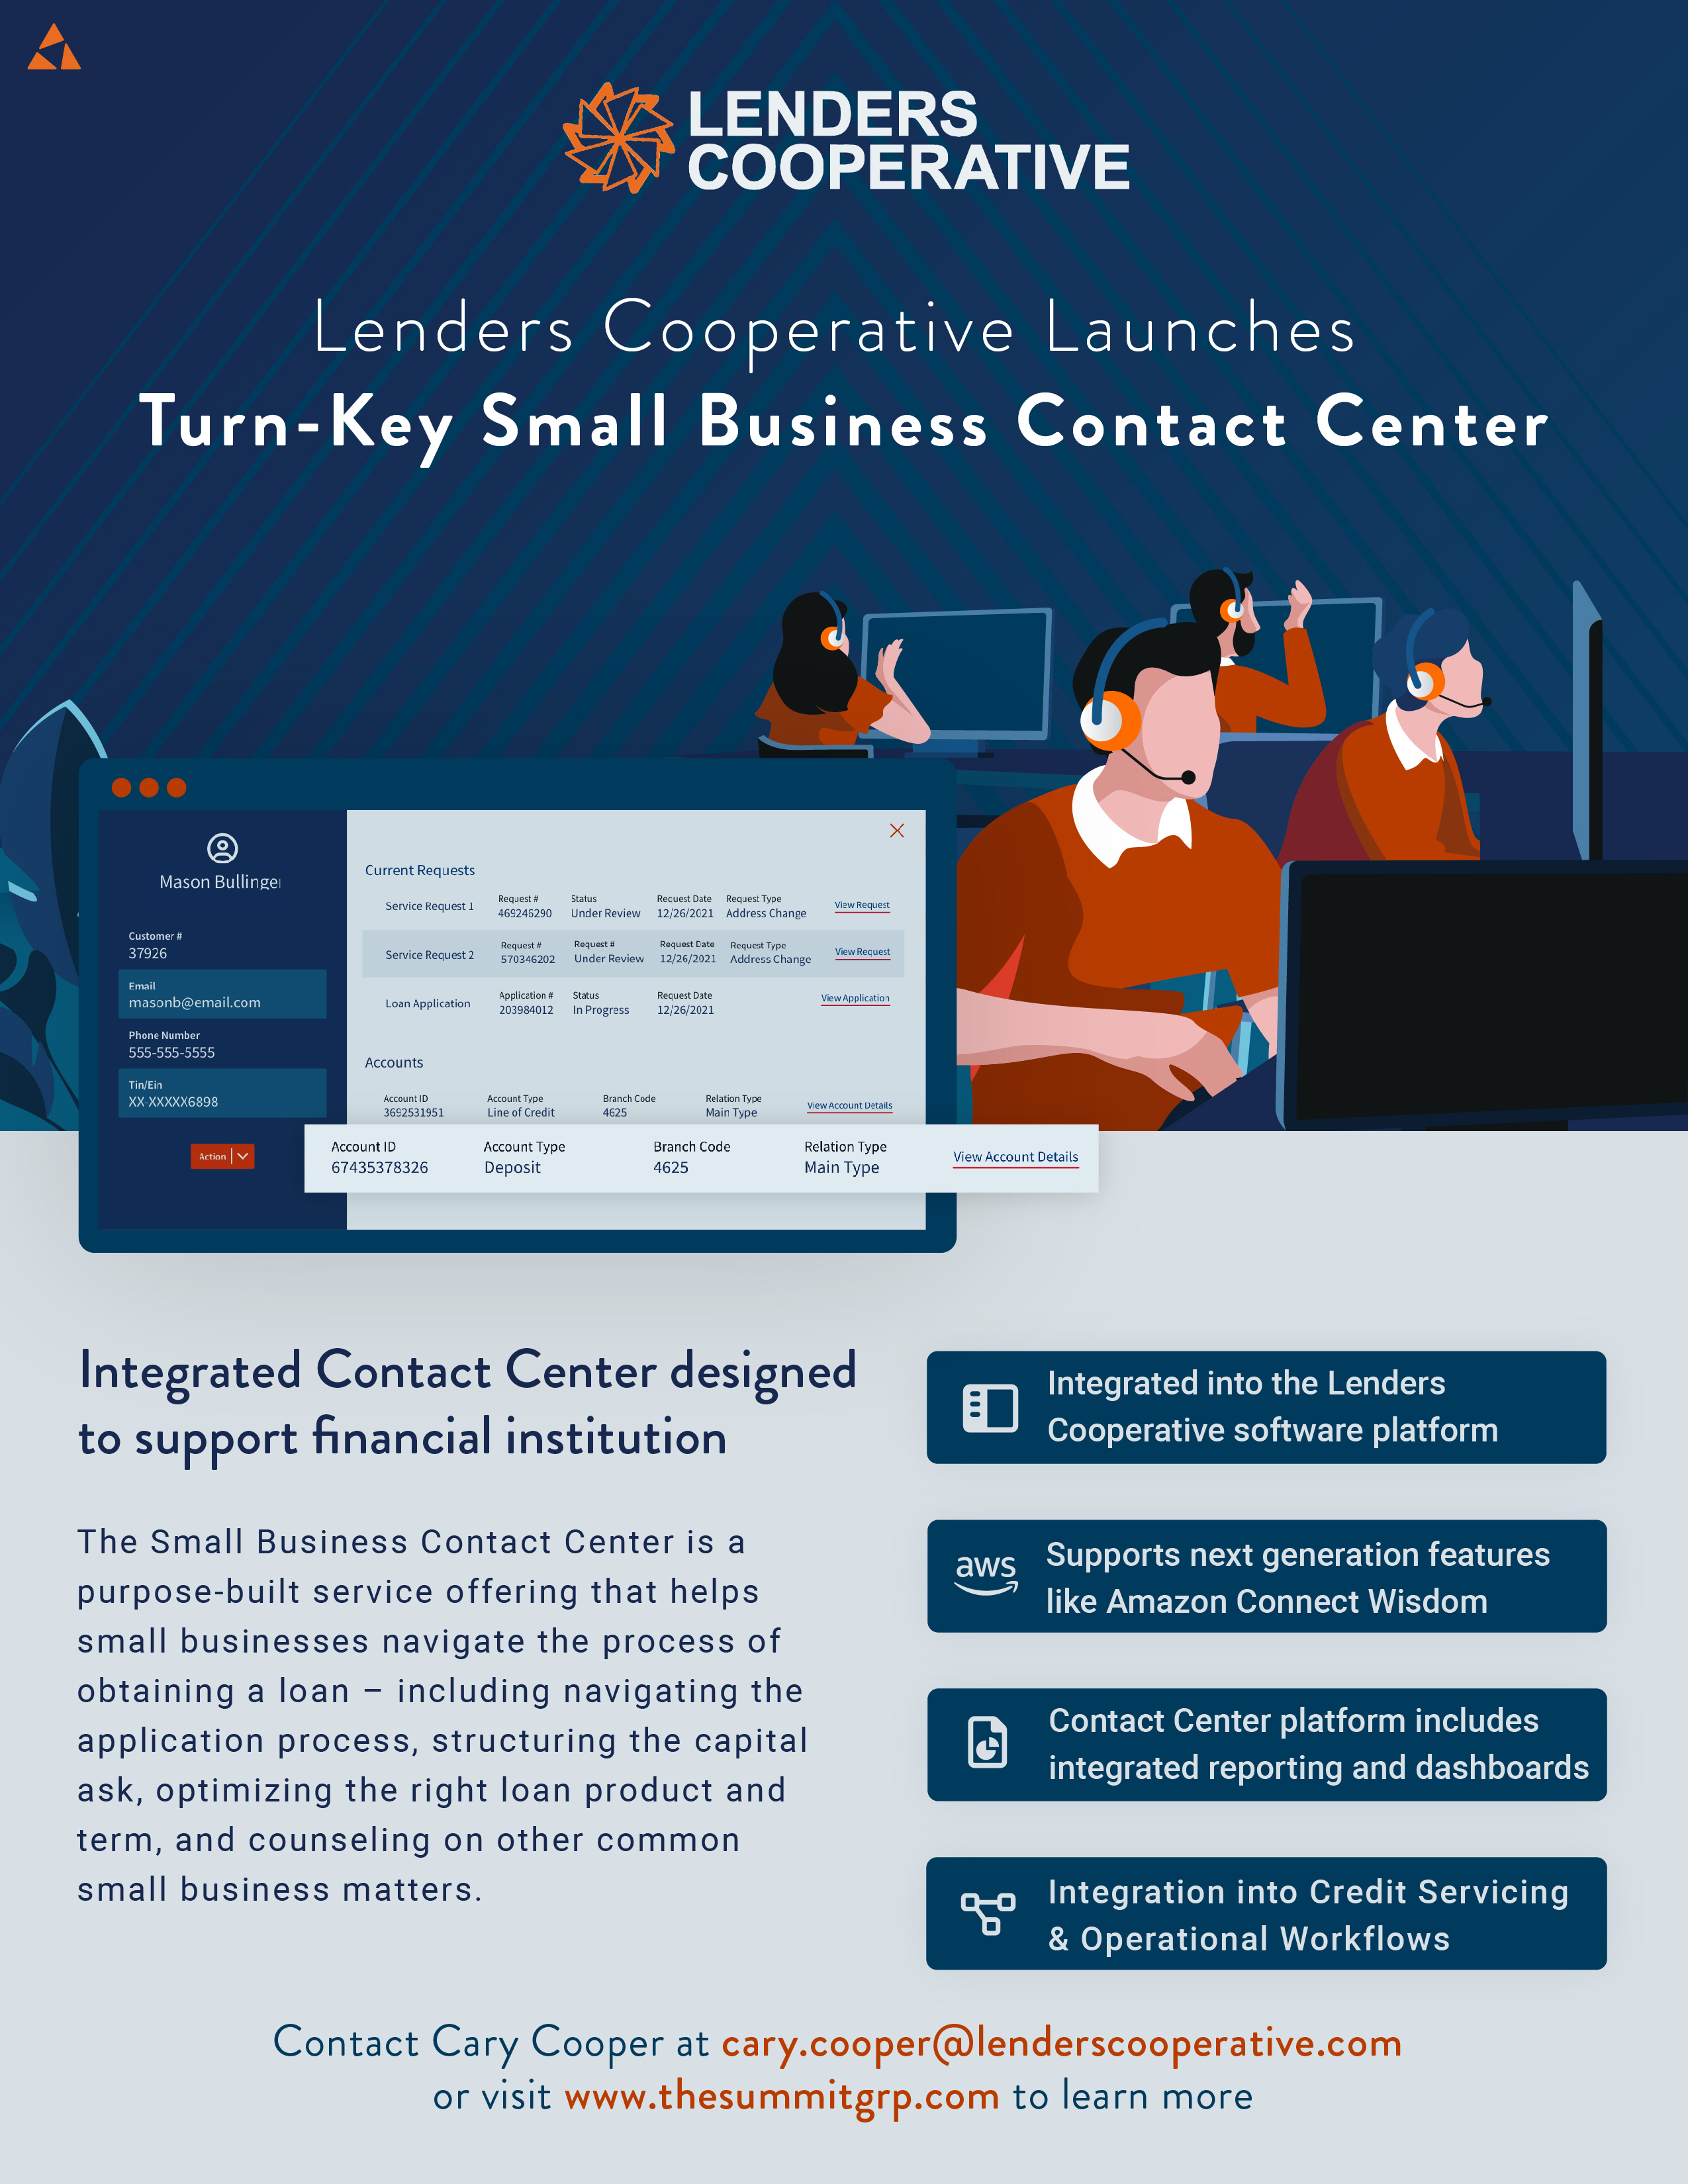 Lenders Cooperative Launches - Turn-Key Small Business Contact Center